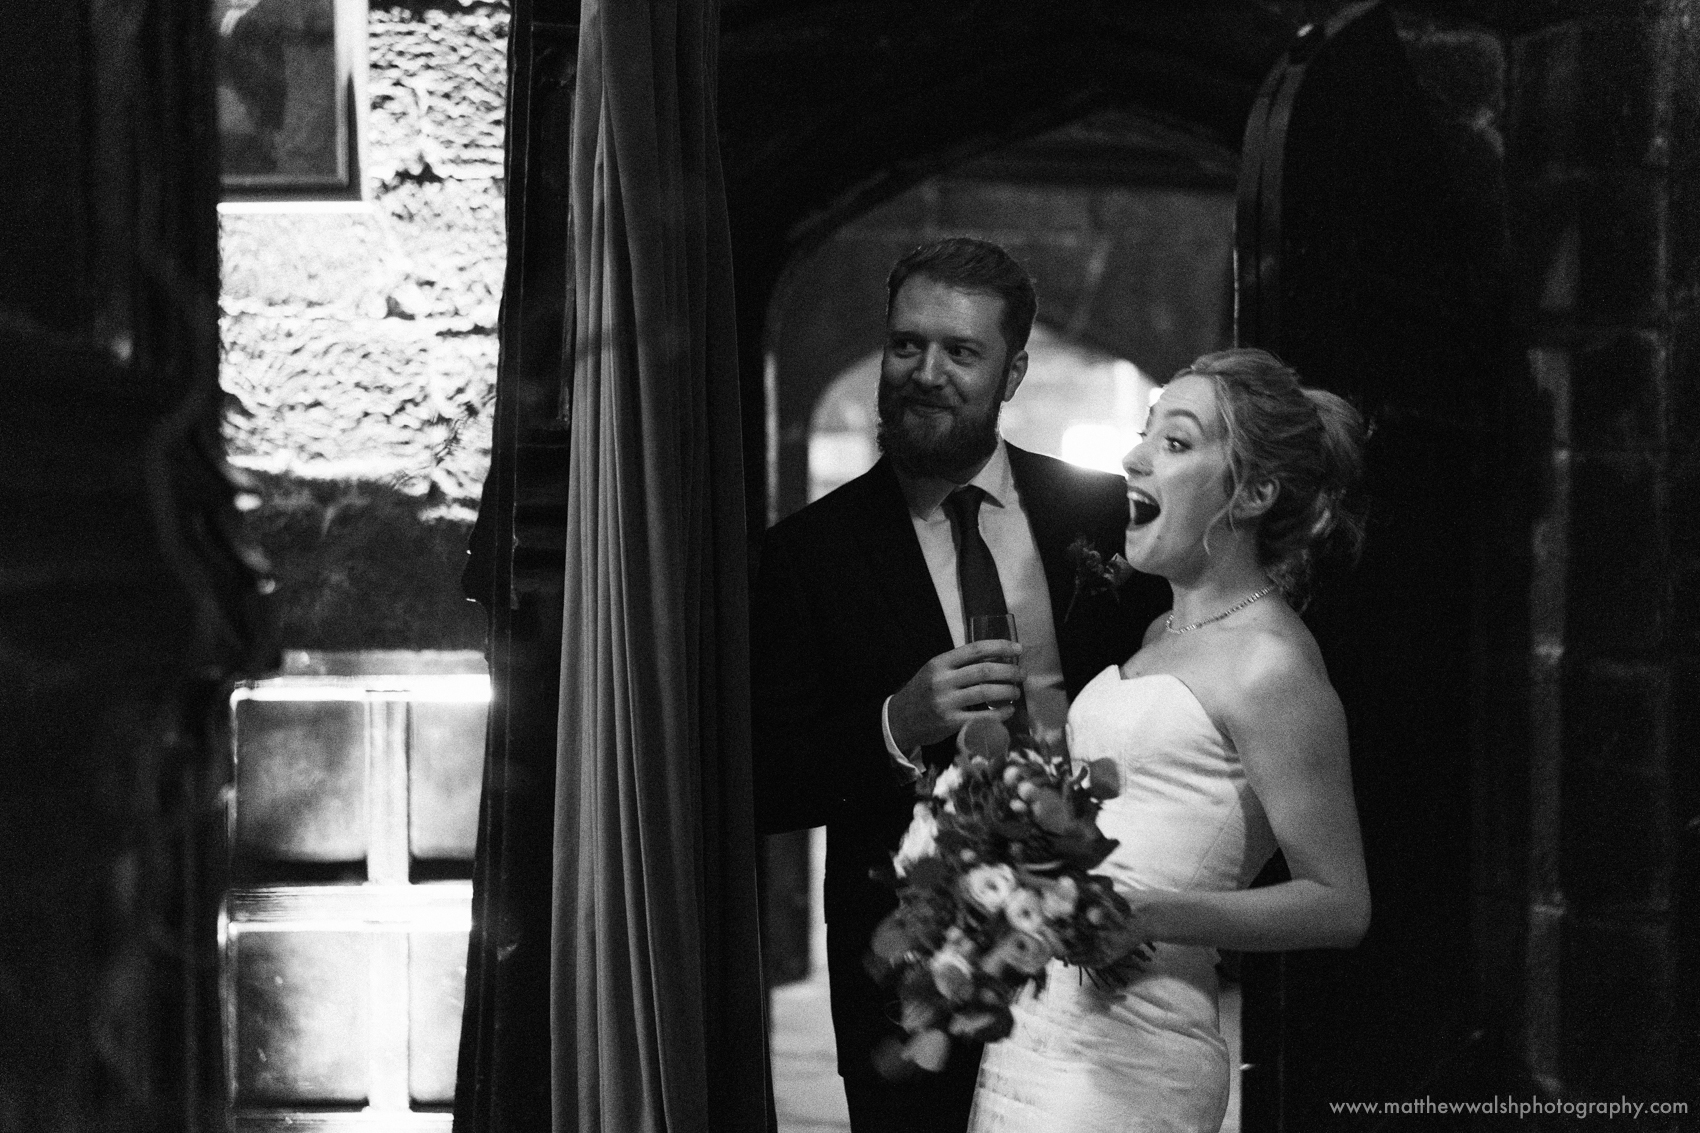 The bride certainly finds something funny